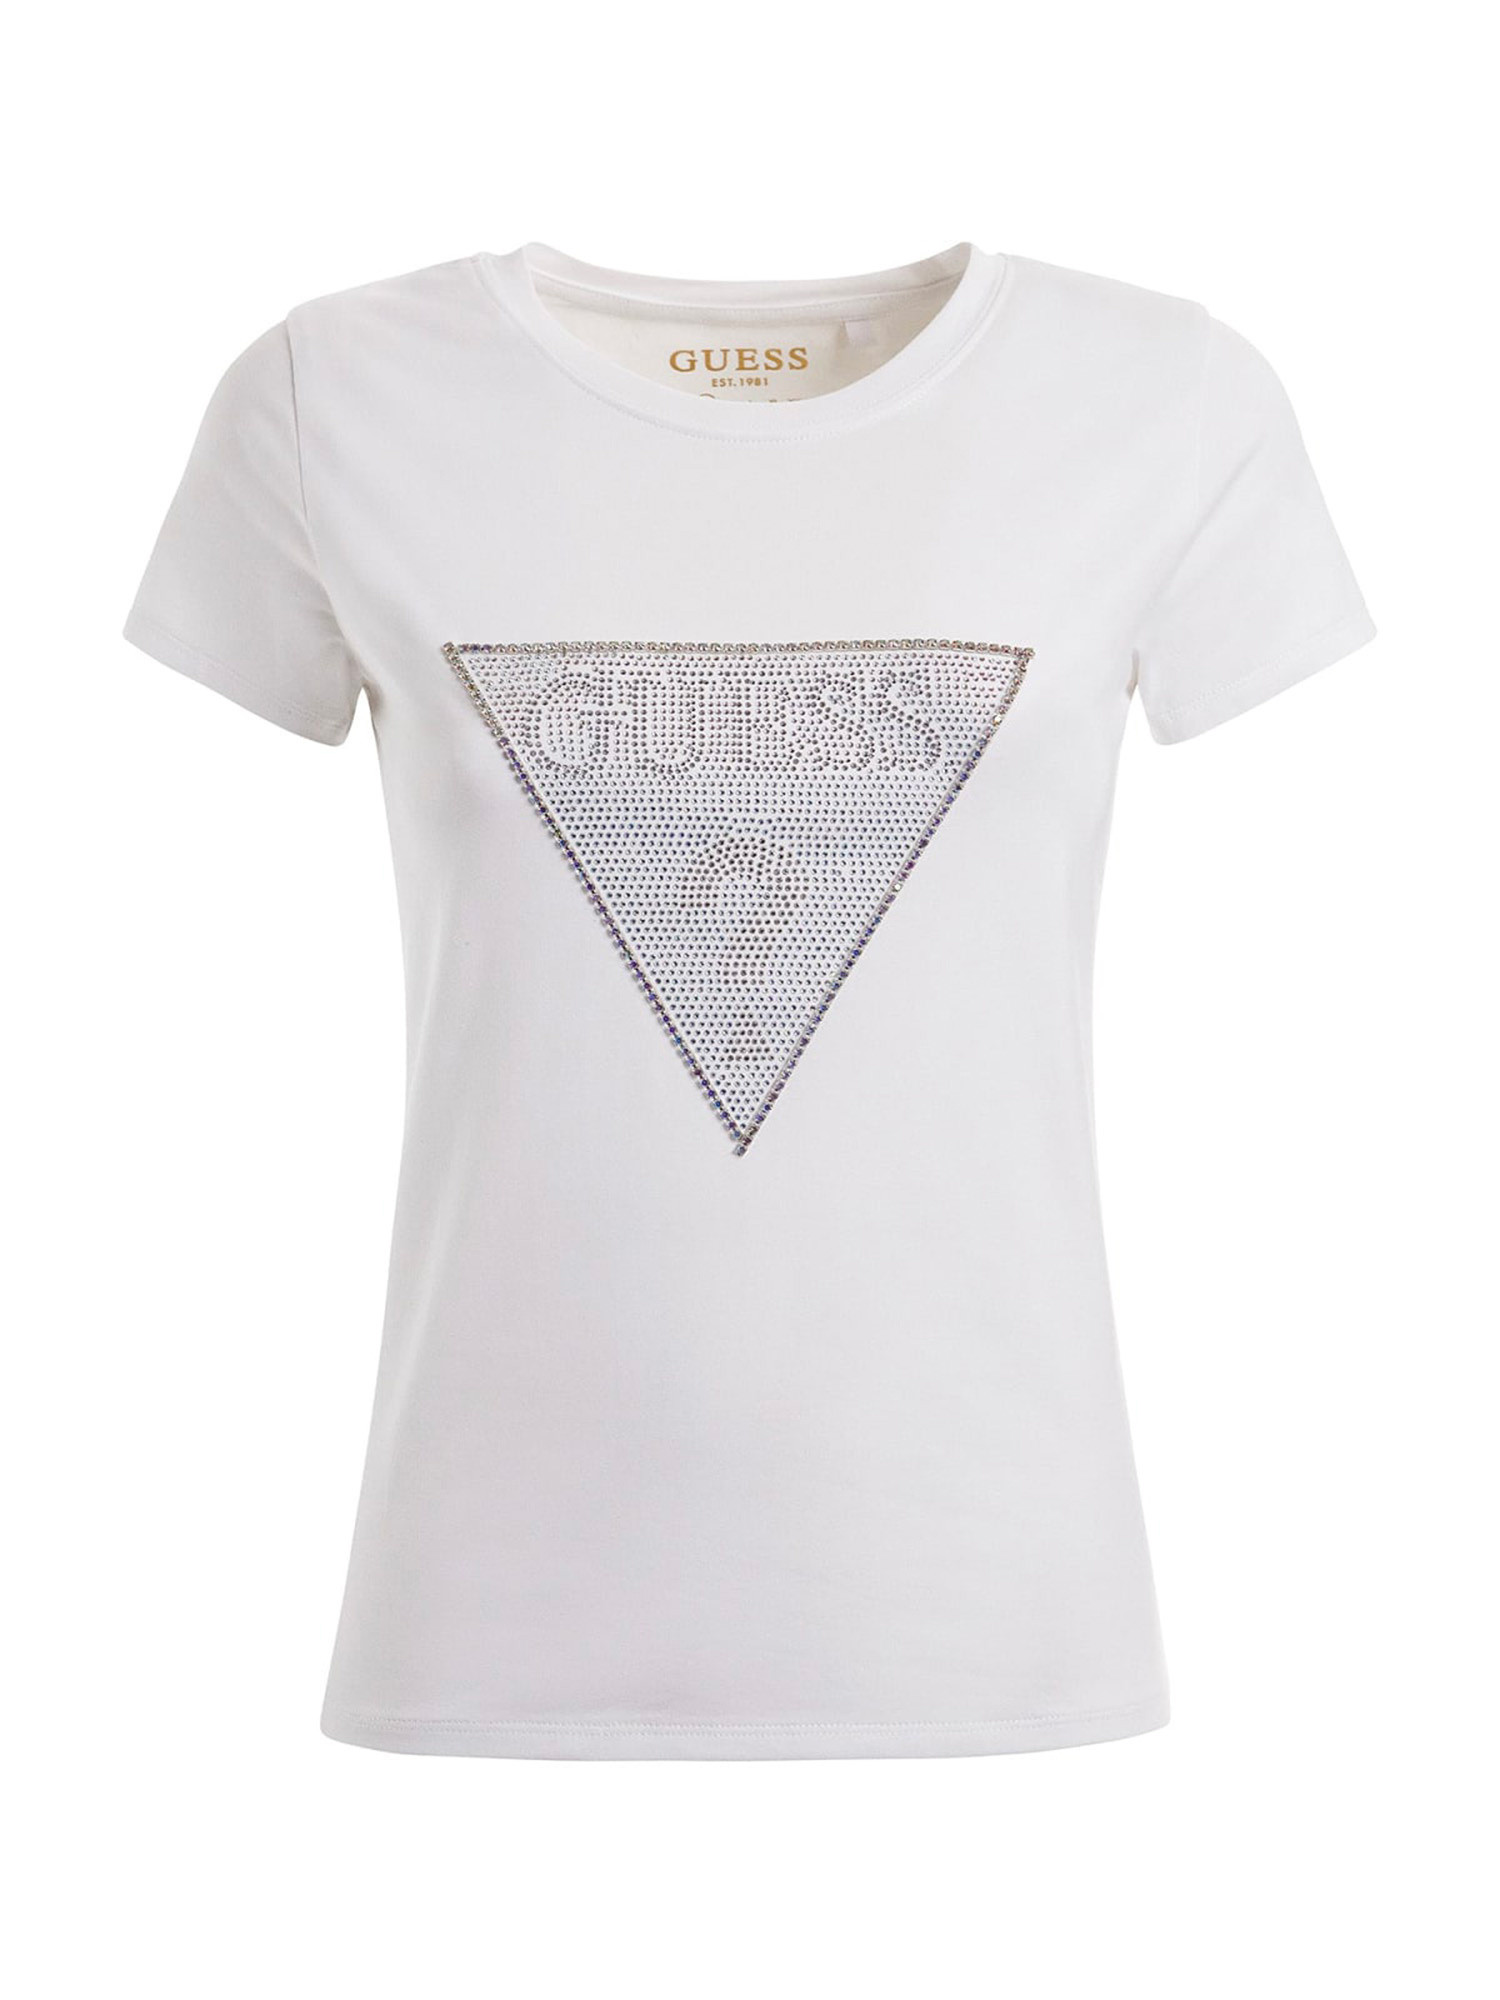 Guess - T-shirt con logo con strass slim fit, Bianco, large image number 0